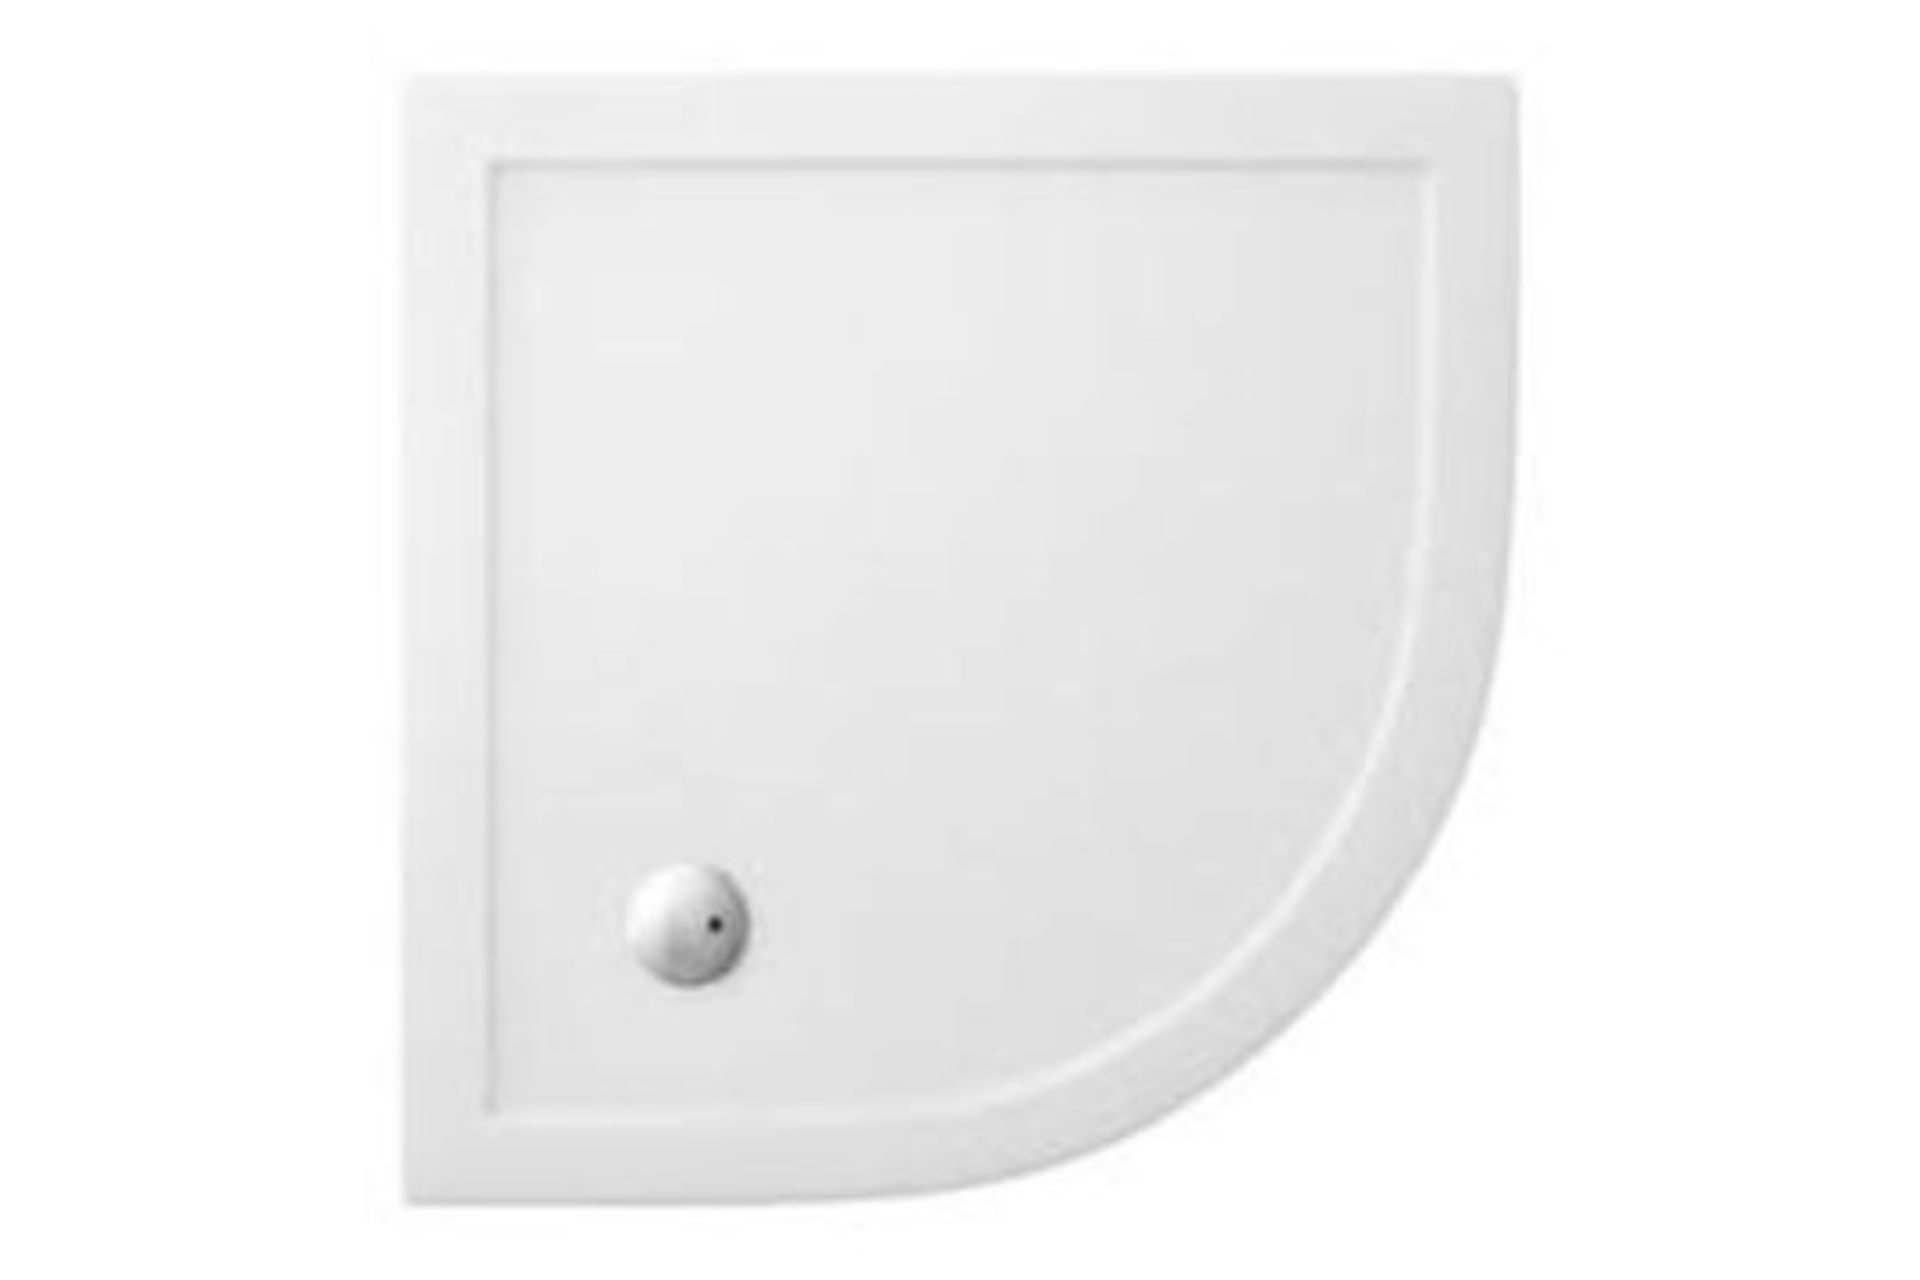 3 X BRAND NEW HIGH QUALITY SHOWER TRAYS WHITE 800 X 800MM R5-4 - Image 2 of 2